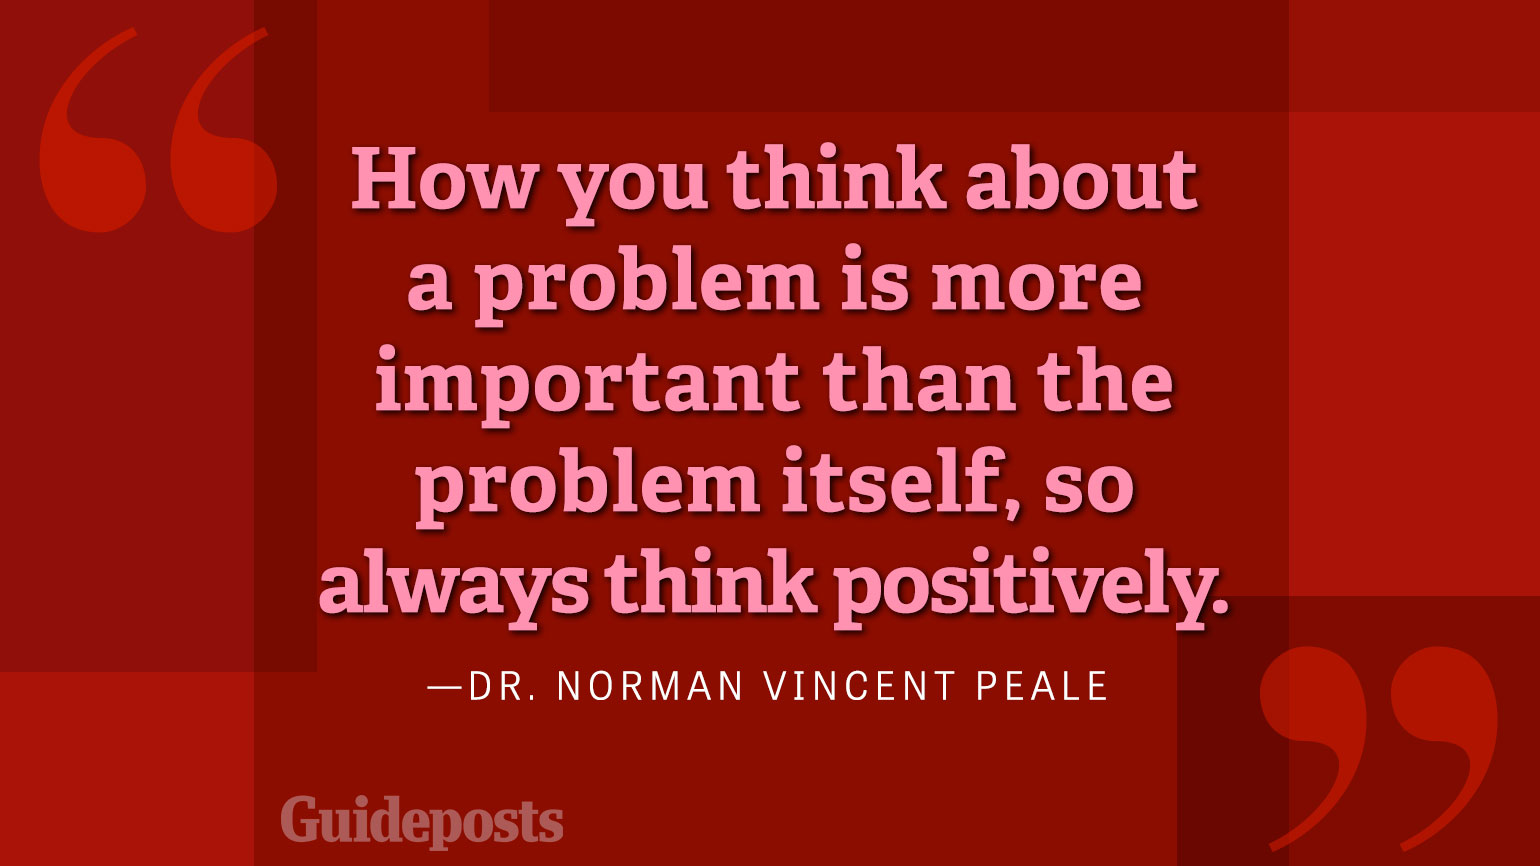 How you think about a problem is more important than the problem itself, so always think positively.